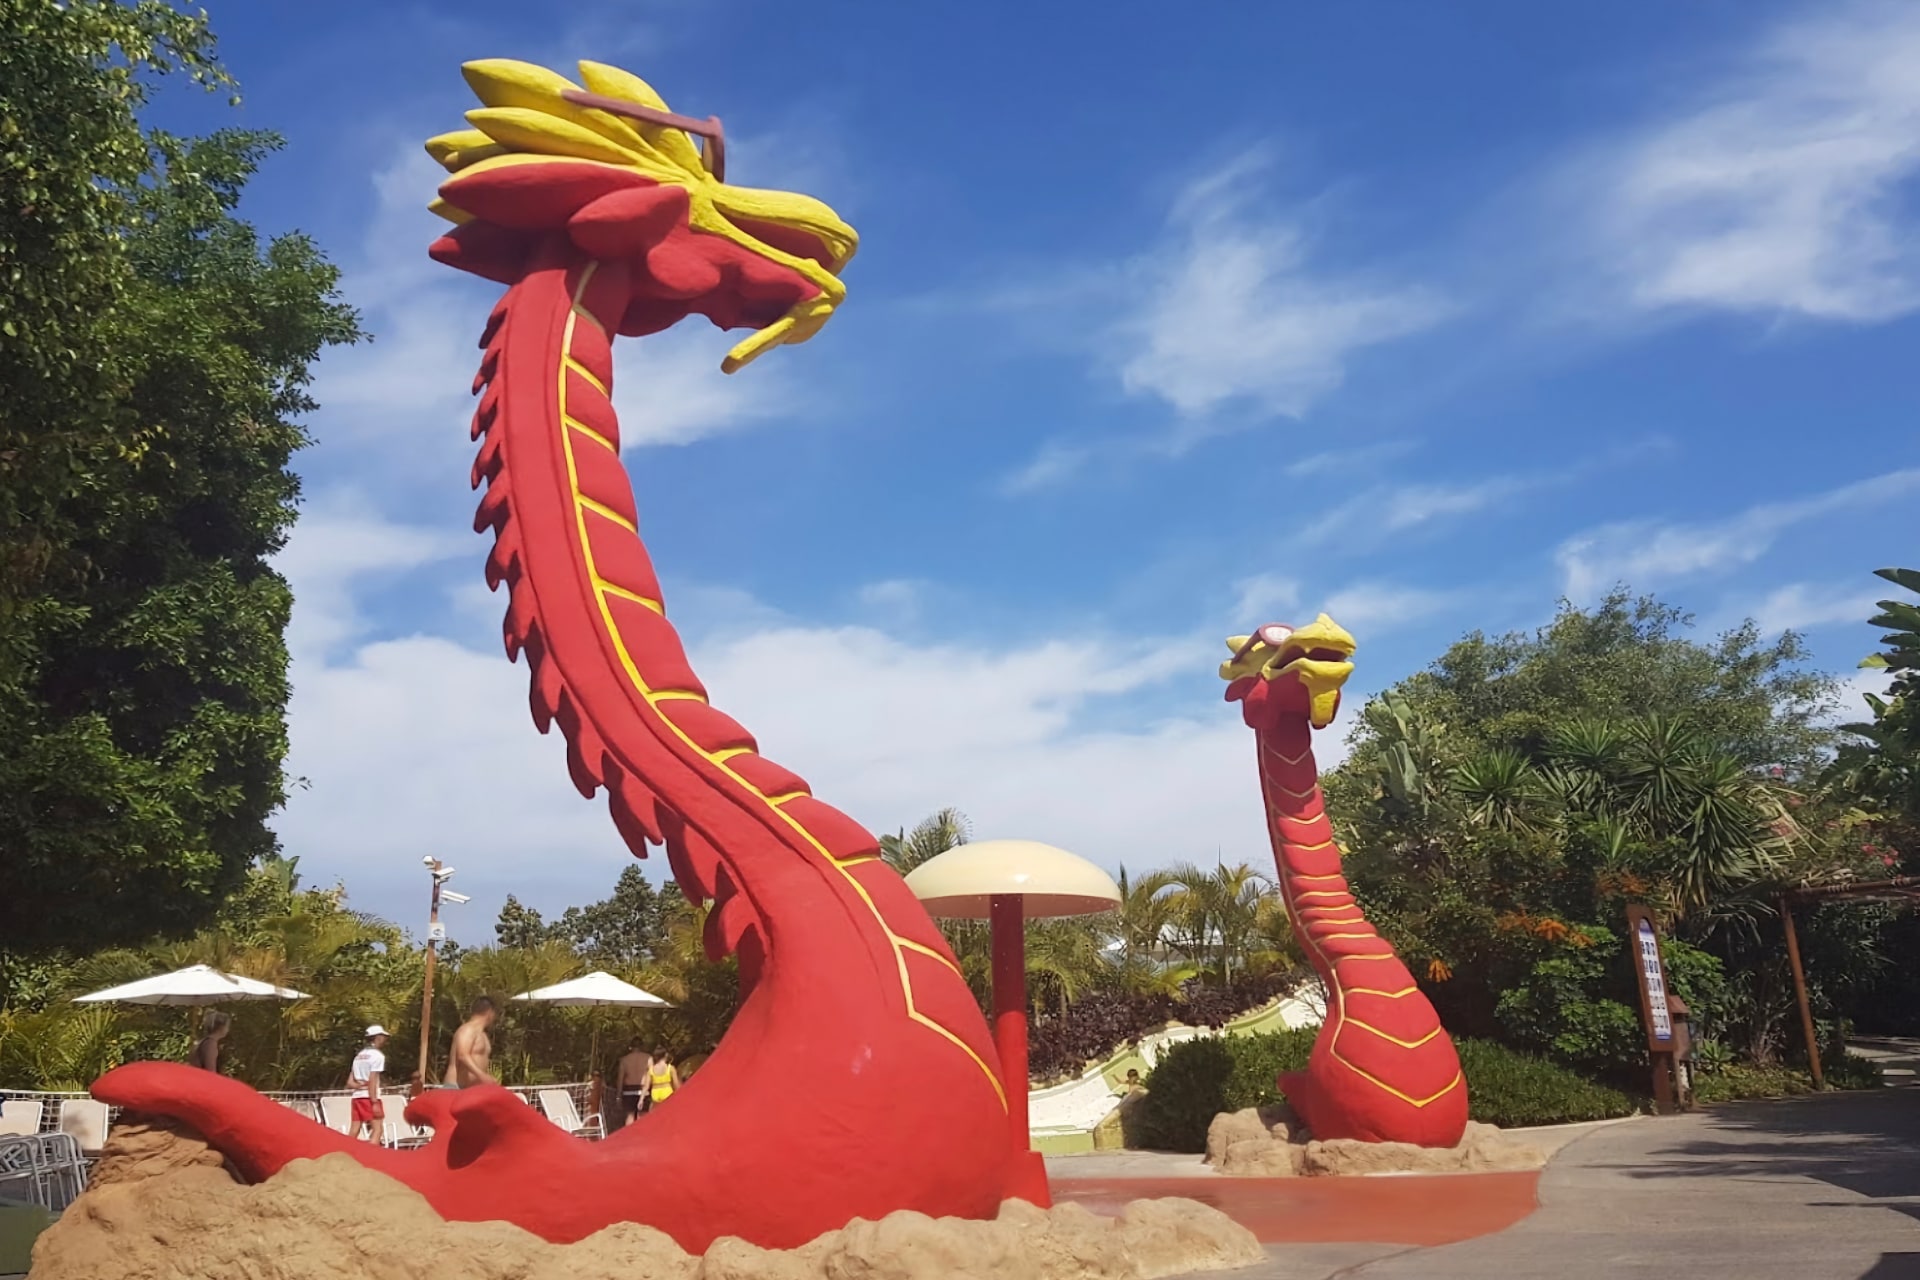 Two impressive statues of red dragons at Siam Park in Tenerife